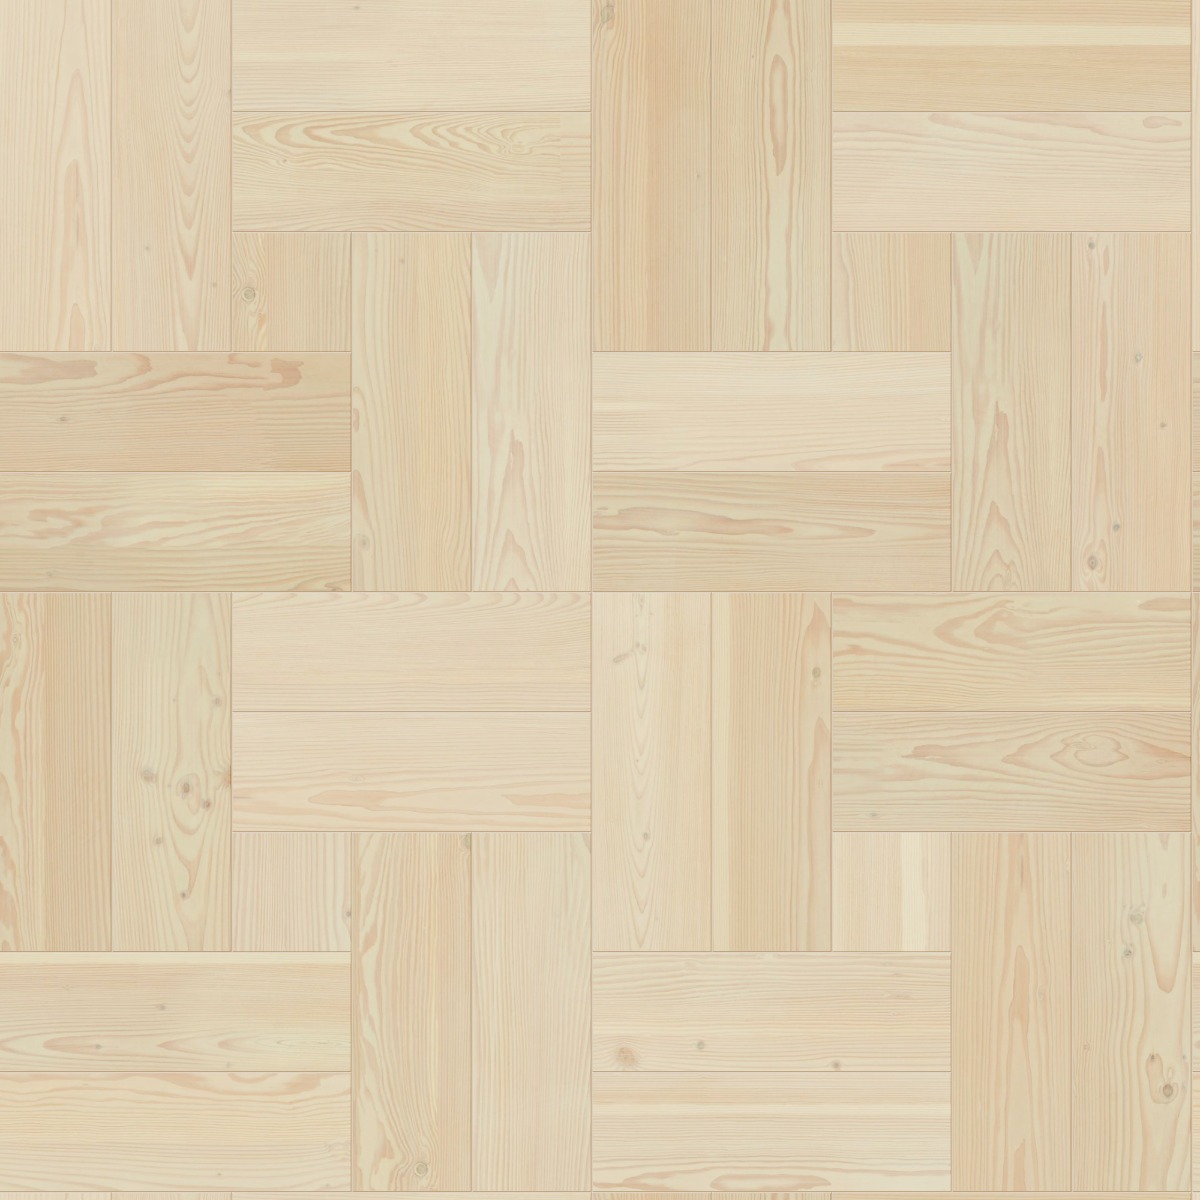 A seamless wood texture with douglas fir boards arranged in a Crosshatch pattern